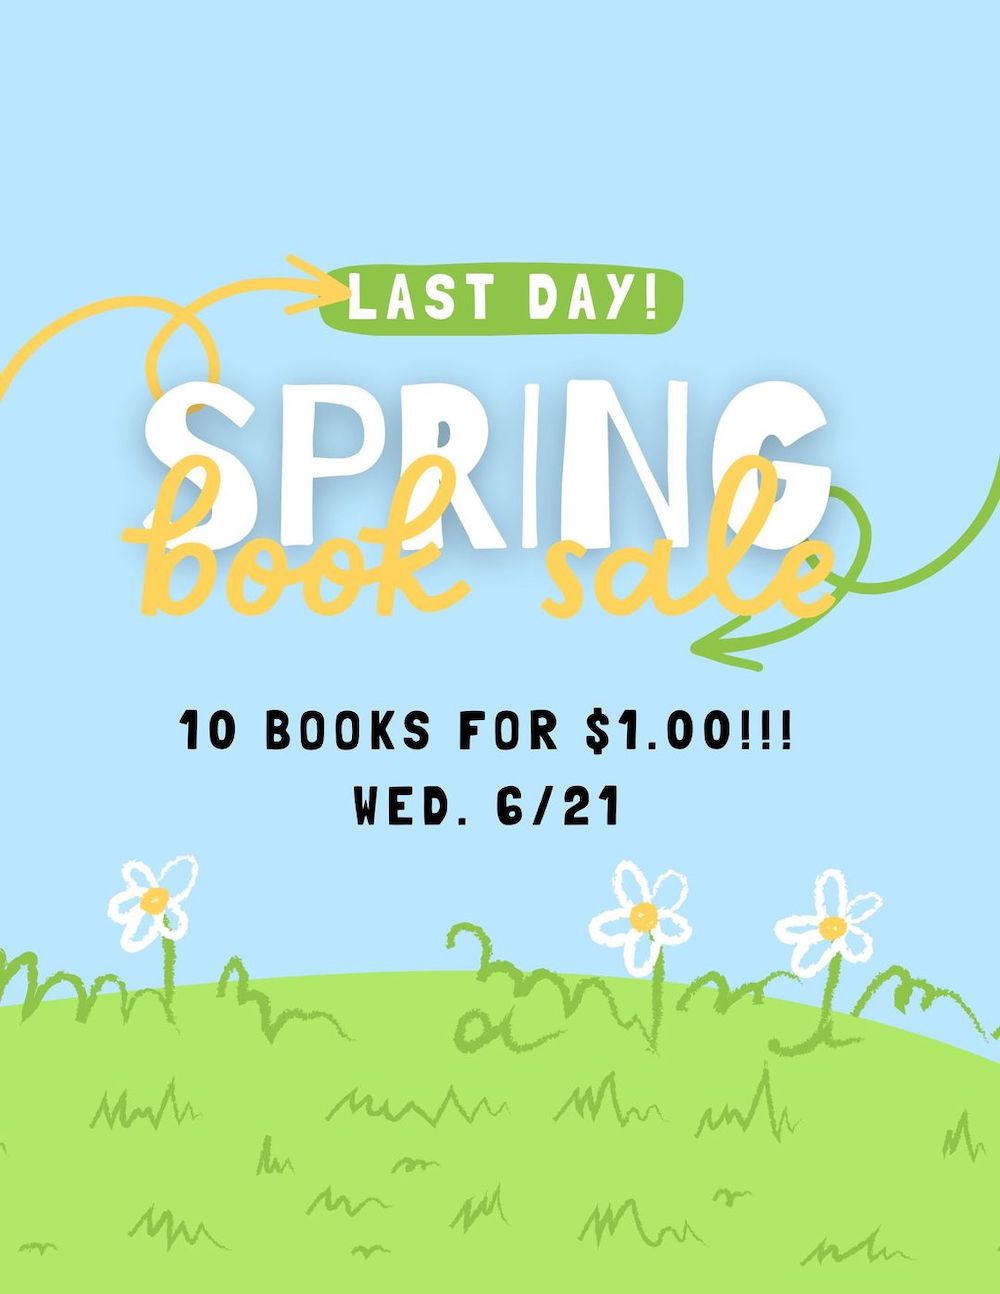 Wednesday is the last day of the Warren Branch Library’s Spring Book Sale